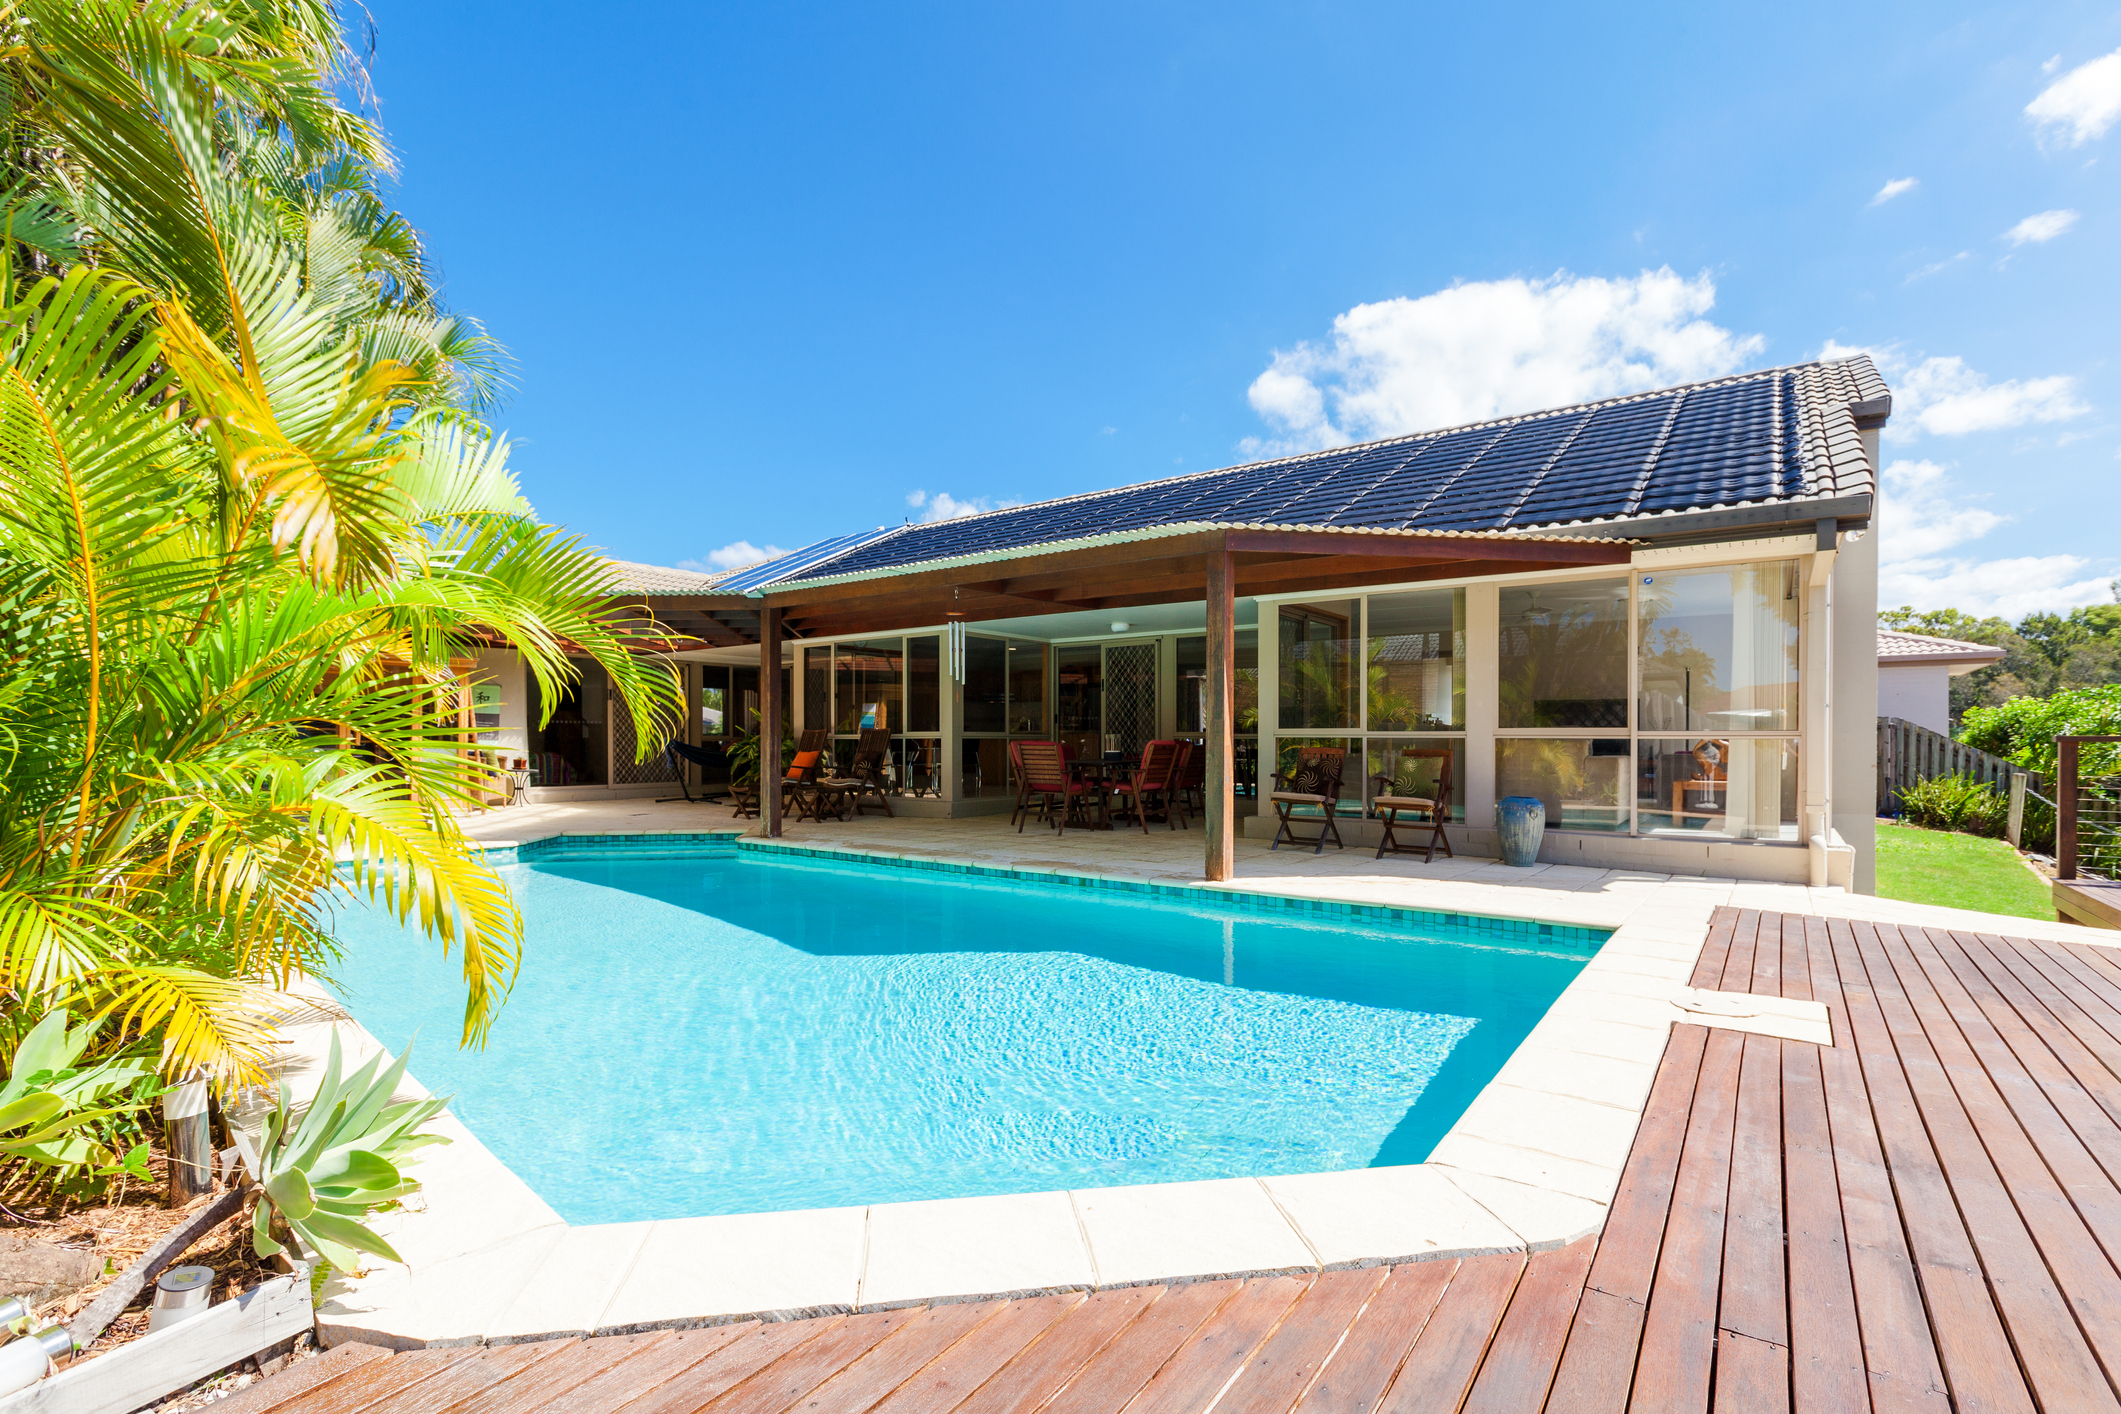 Backyard of home with solar panels and swimming pool